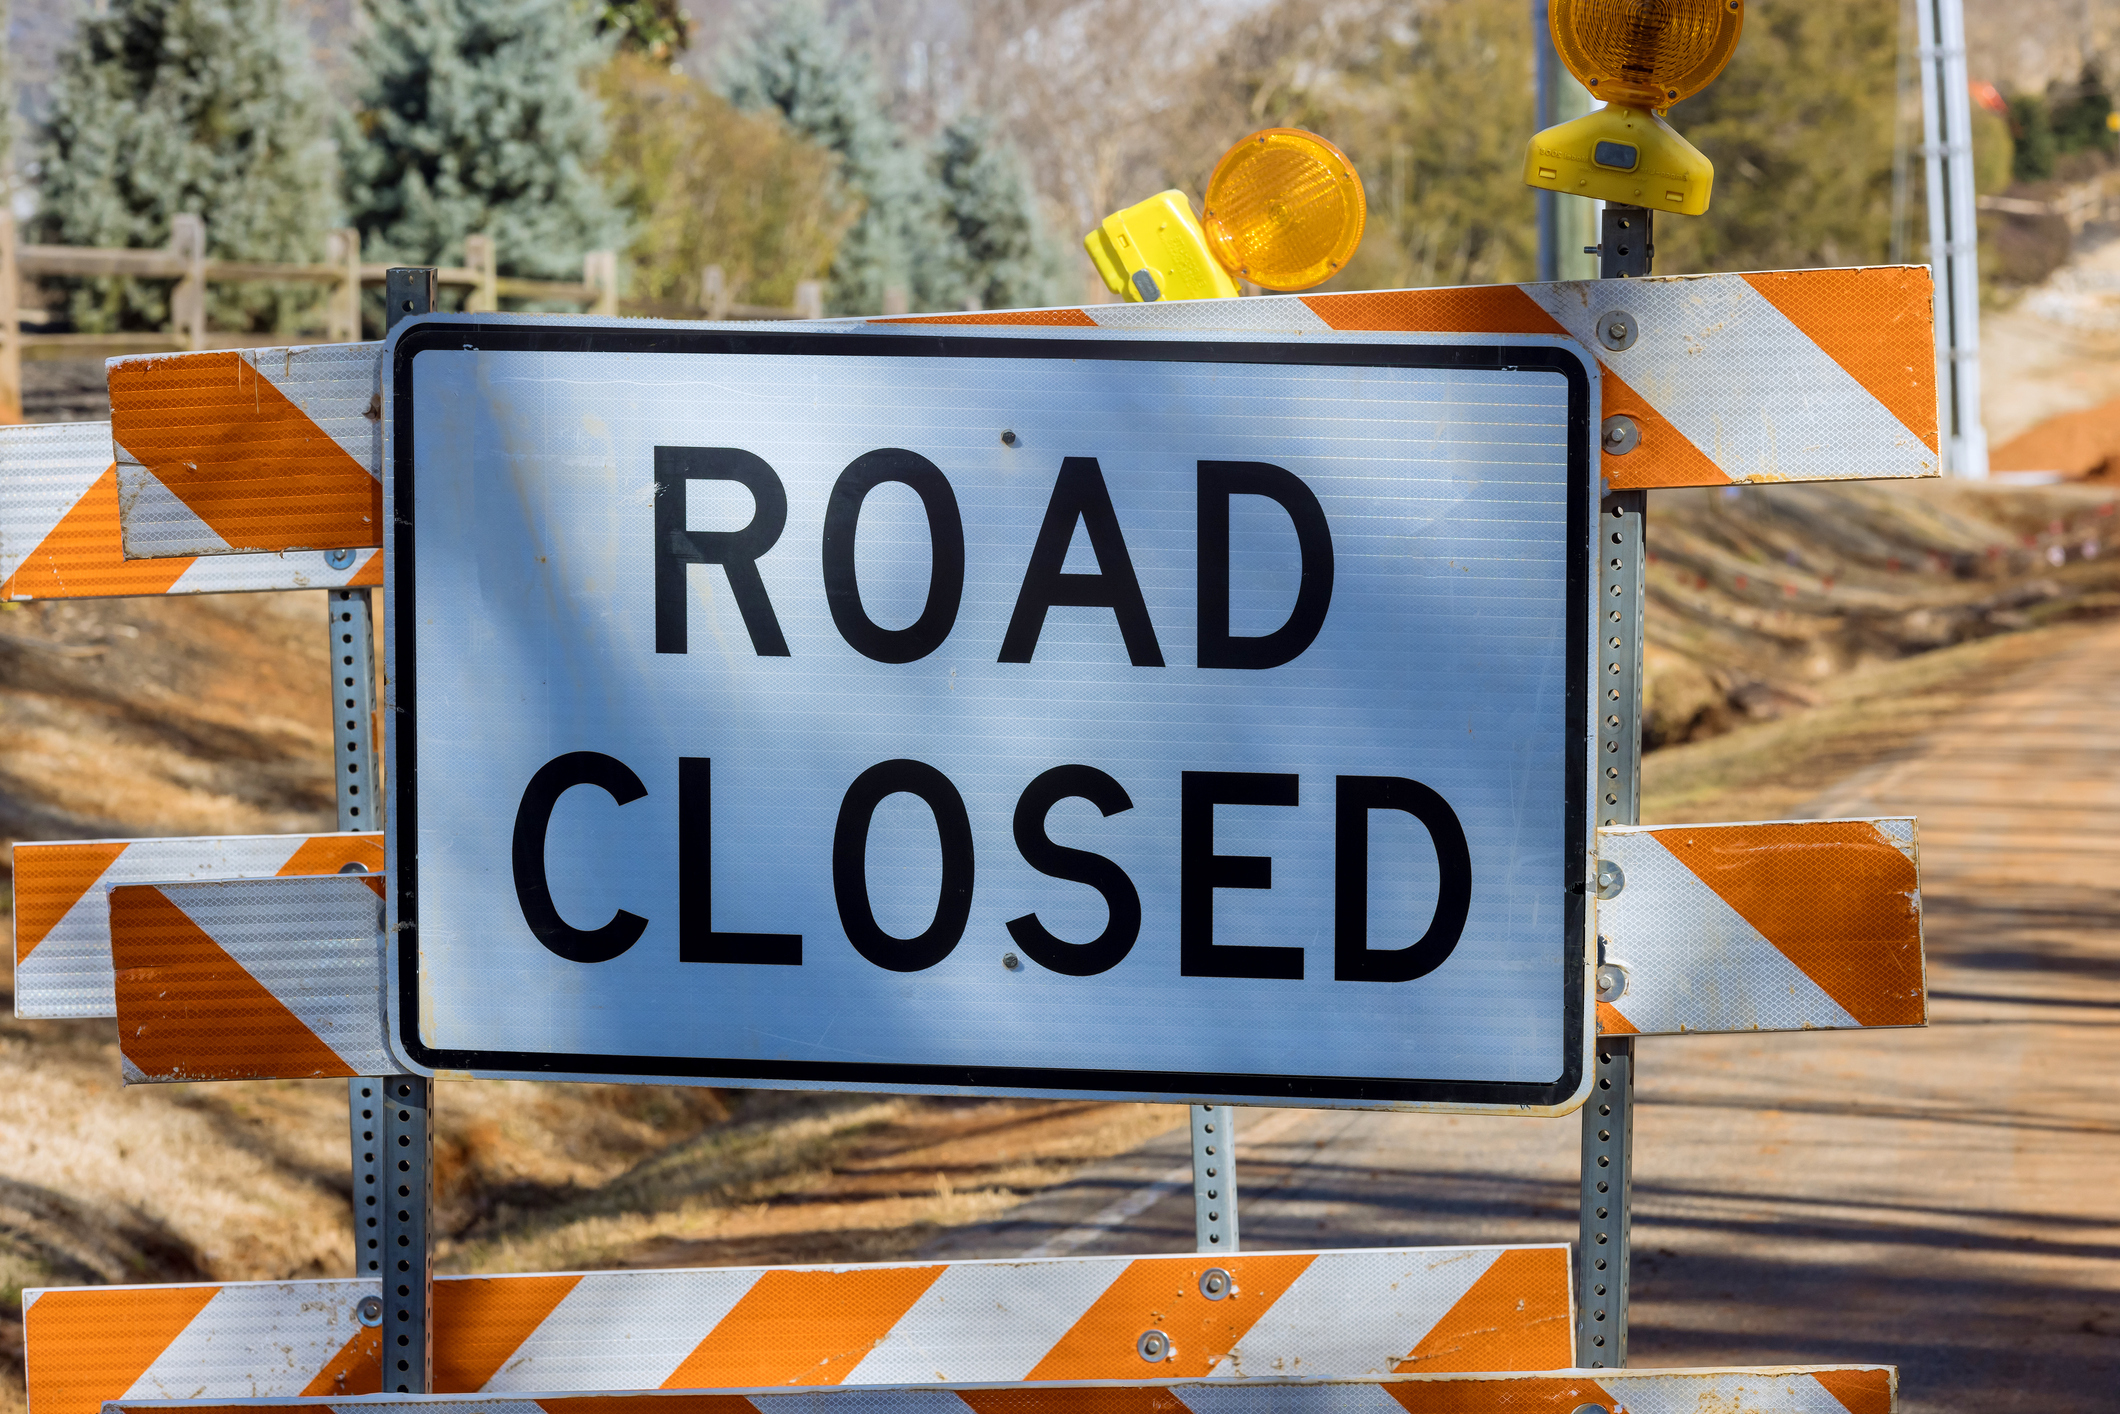 Road closed caution sign on highway in road reconstruction (iStock photo by photovs)